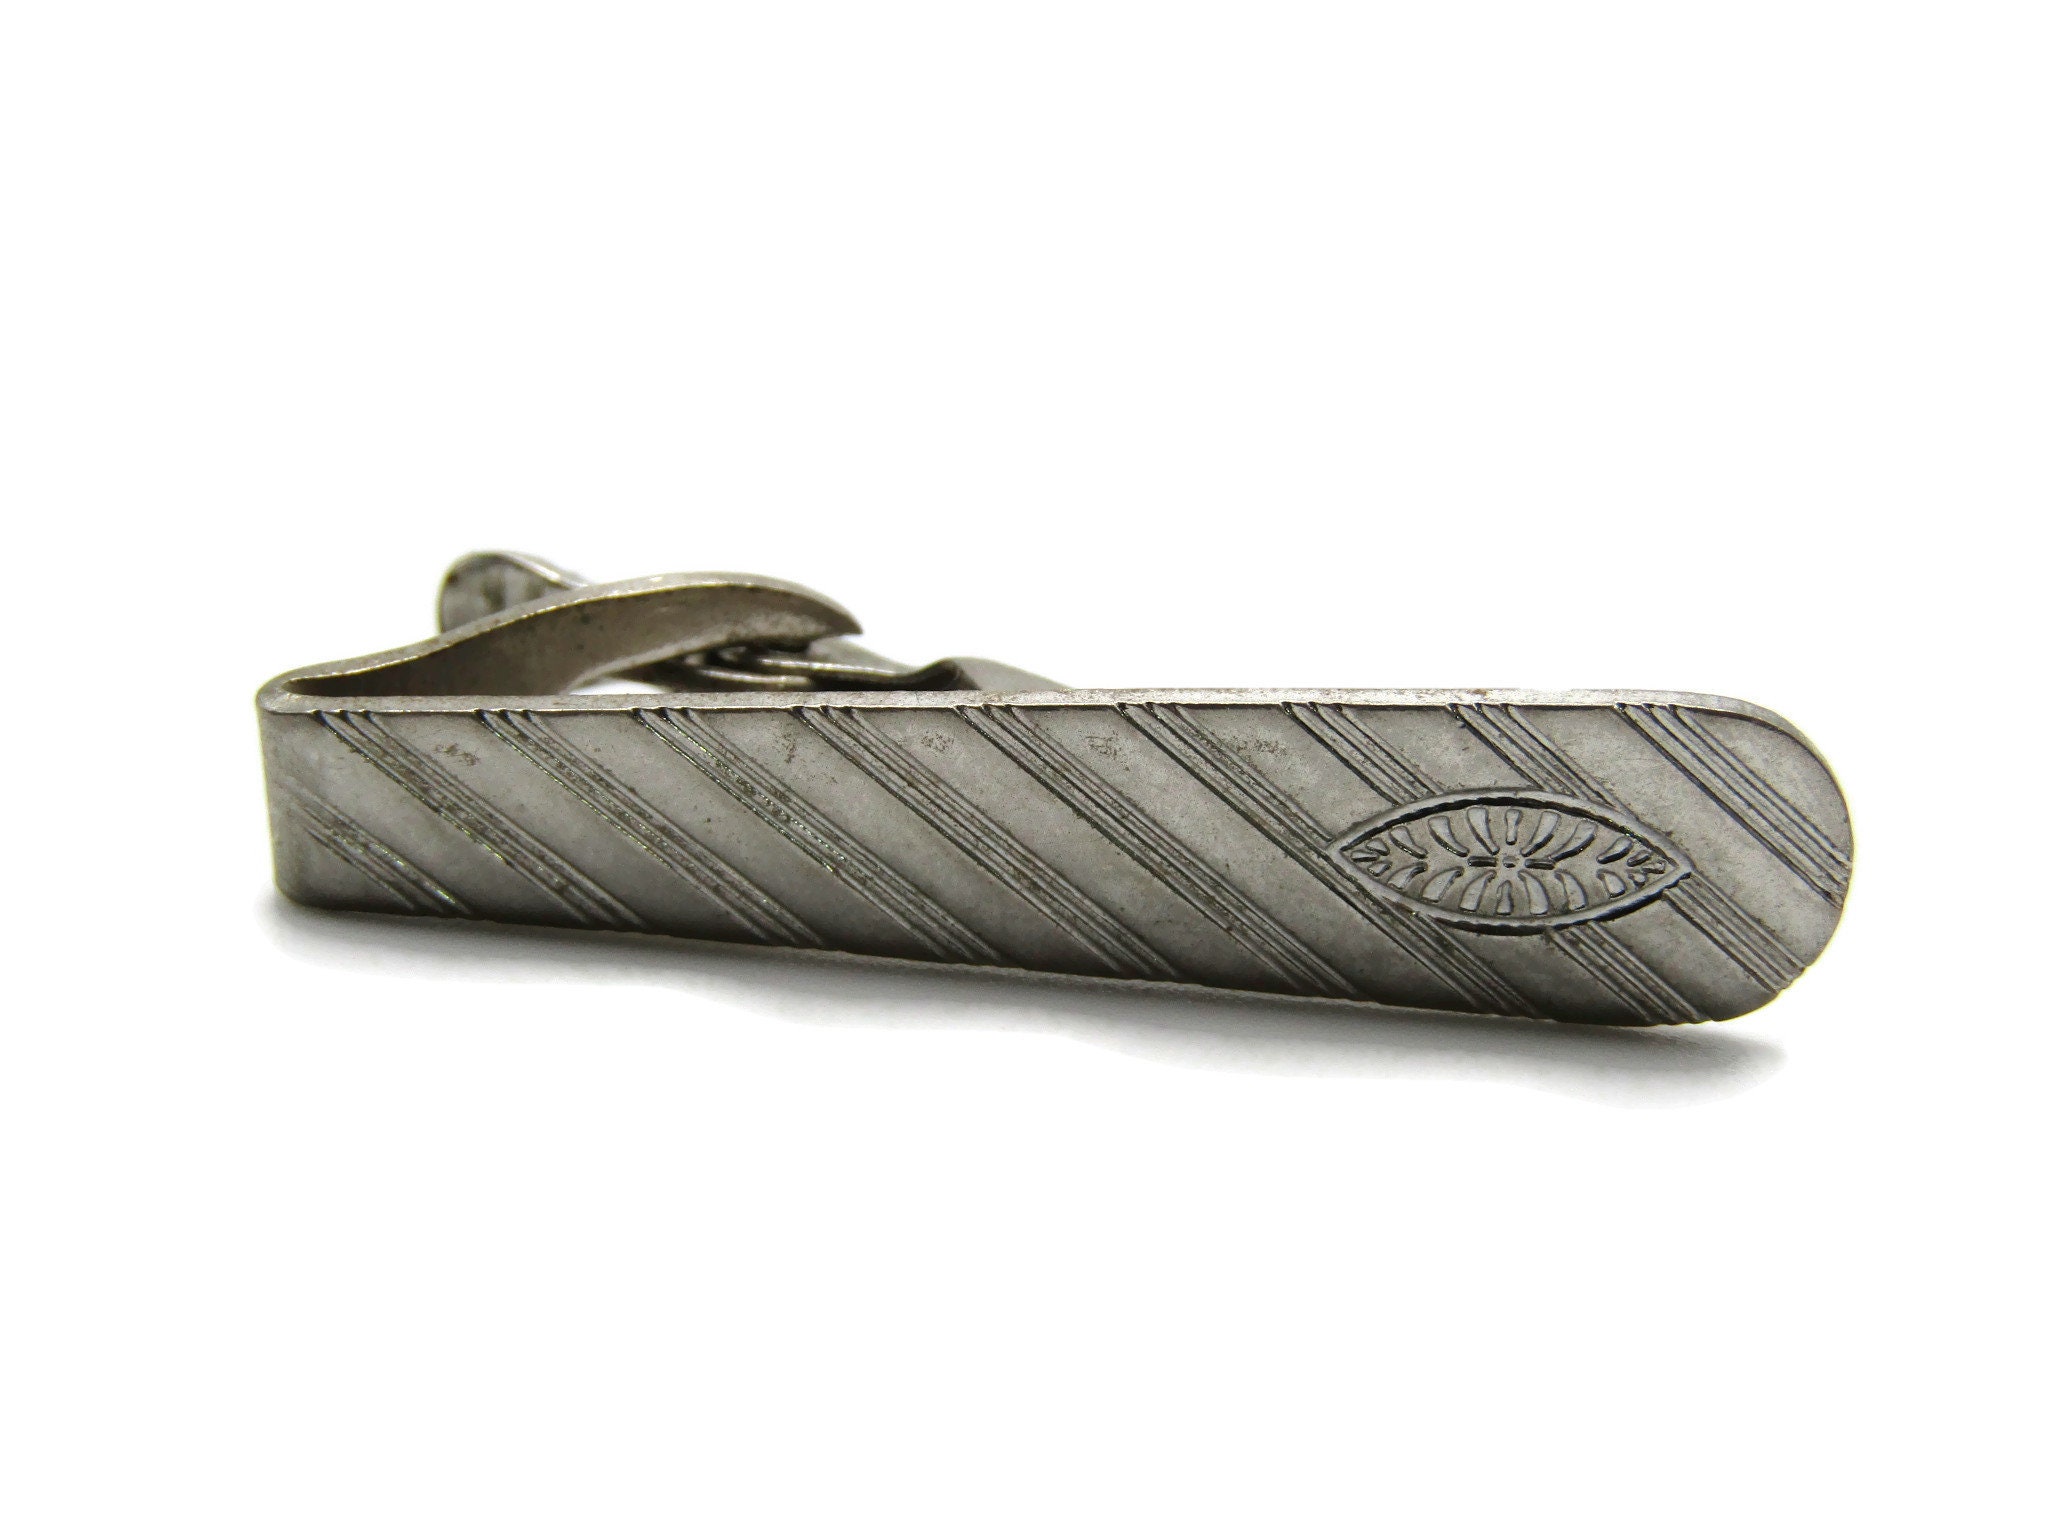 Classic Look Personalized Tie Bar